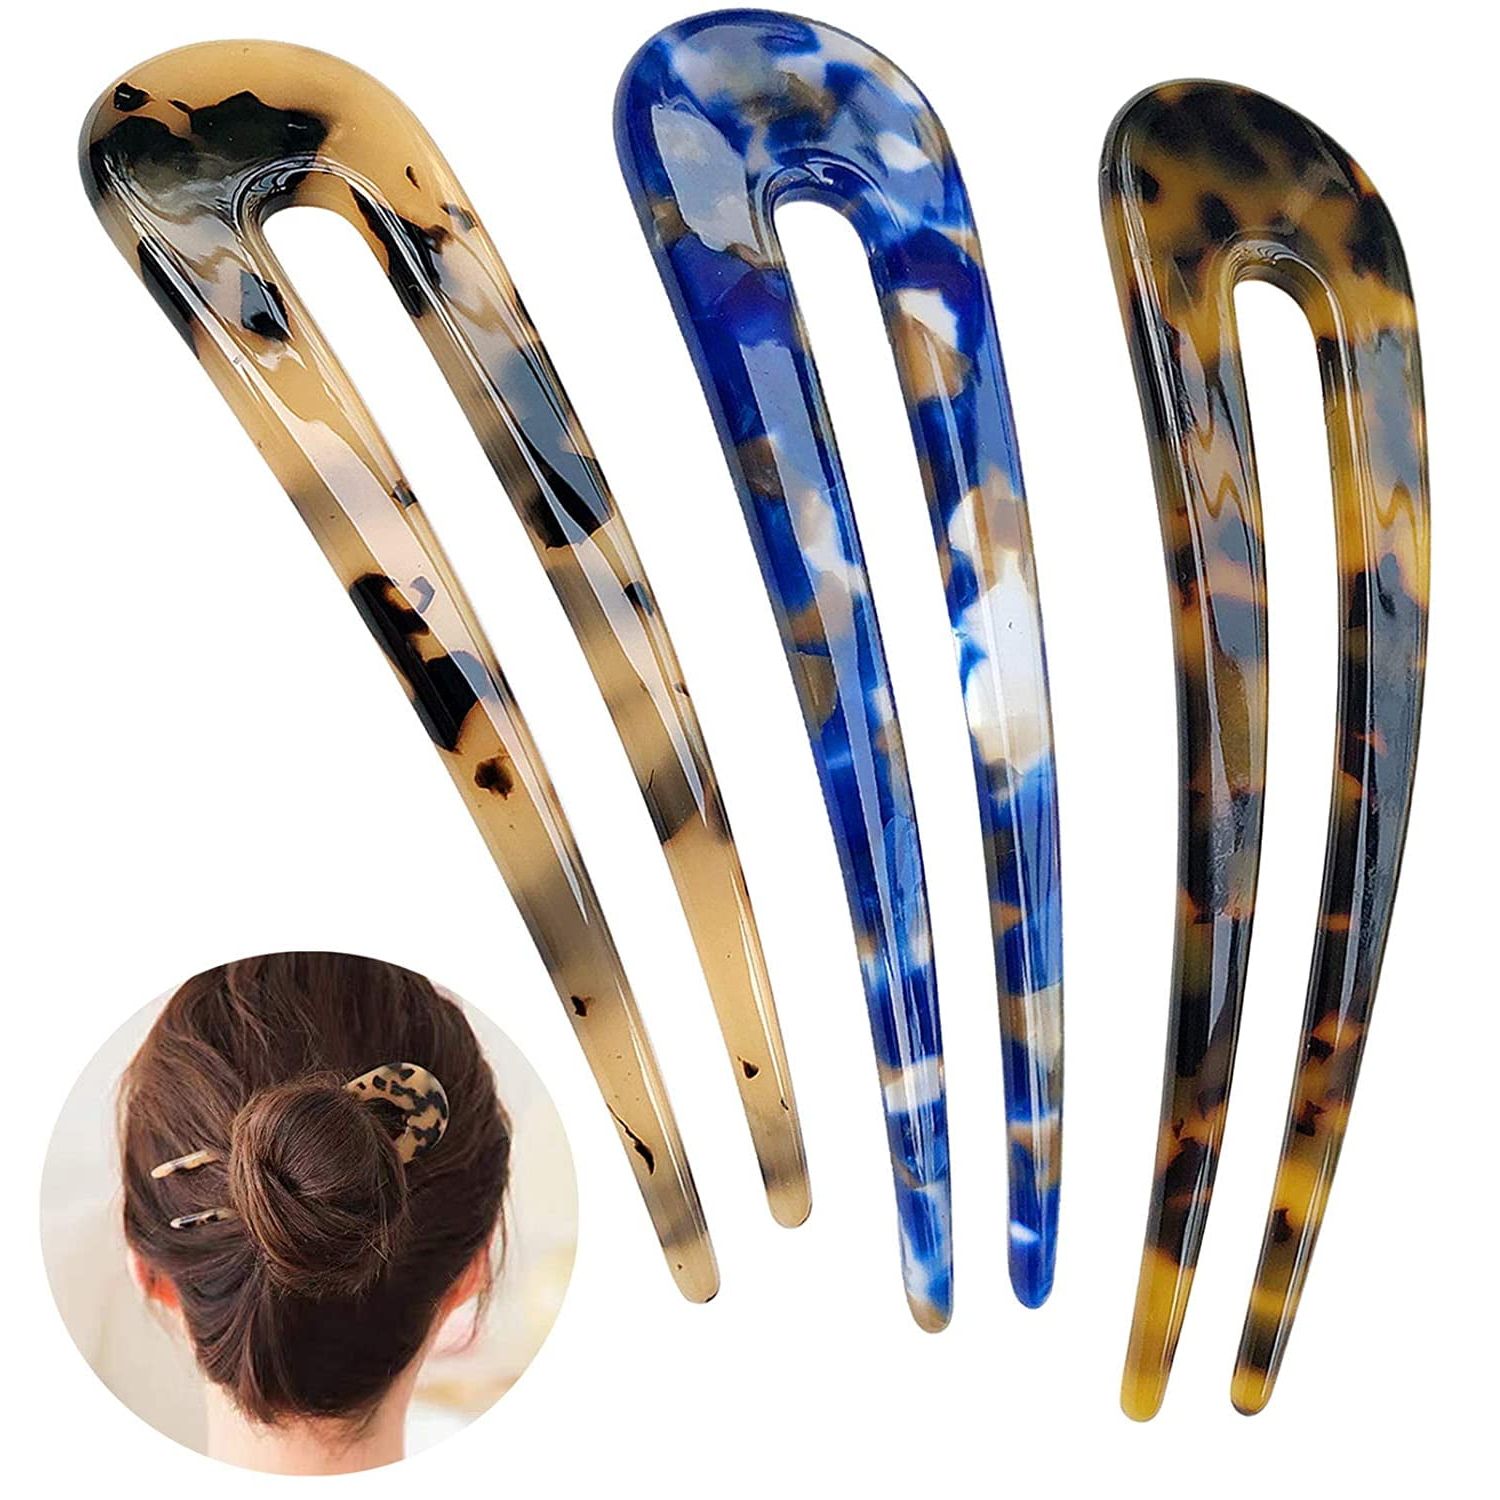 French Hair Forks Tortoise Shell U Shape Updo Hair Pins Clips For Thin Thick  Hair, 4.3 Inch Classic Cellulose Acetate 2 Prong Bun Hair Sticks Chignon  Women Vintage Hairstyle Accessories, 3 Pack – Walmart Intended For Most Up To Date Bun Updo With Accessories For Thick Hair (Gallery 5 of 15)